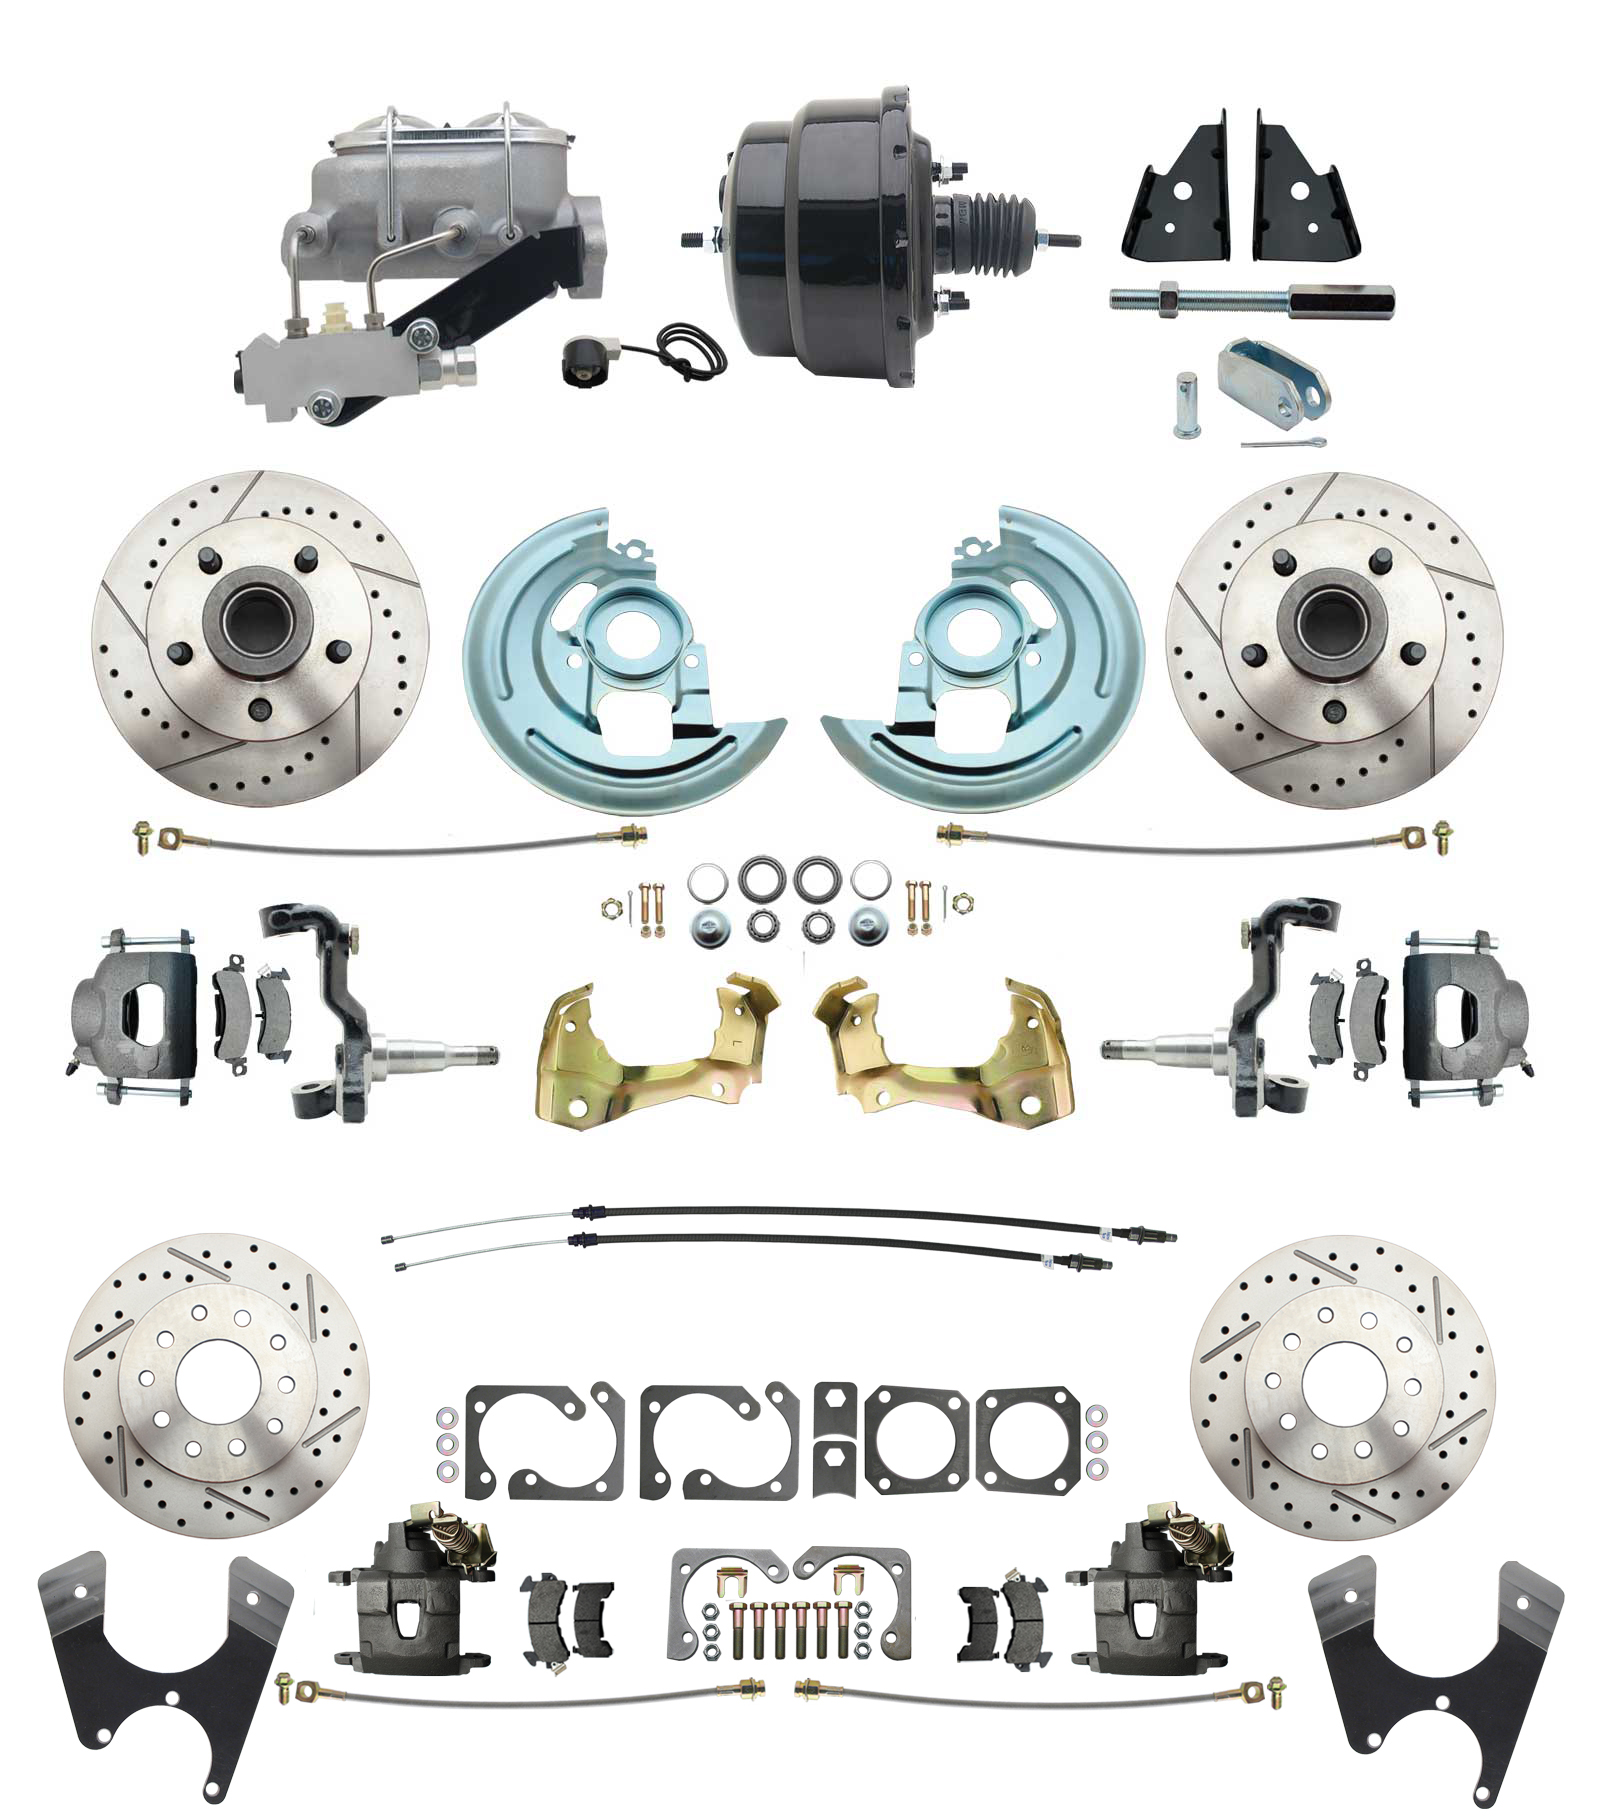 1967-1969 Camaro/ Firebird & 1968-1974 Chevy Nova Front & Rear Power Disc Brake Conversion Kit Drilled & Slotted Rotors W/ 8 Dual Powder Coated Black Booster Kit